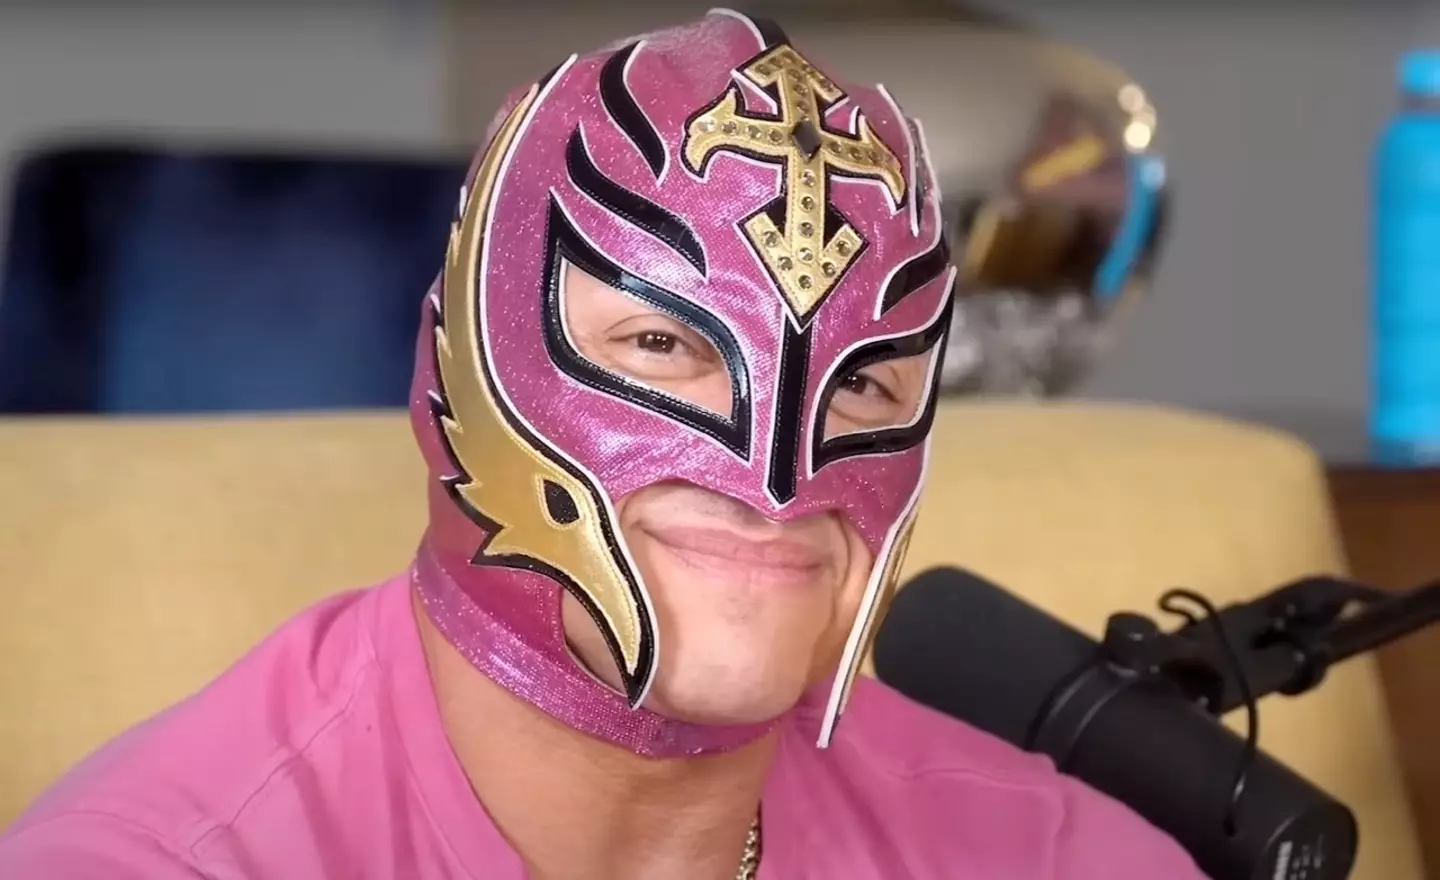 Rey Mysterio has revealed the truth behind the Jennifer Aniston dating rumours.